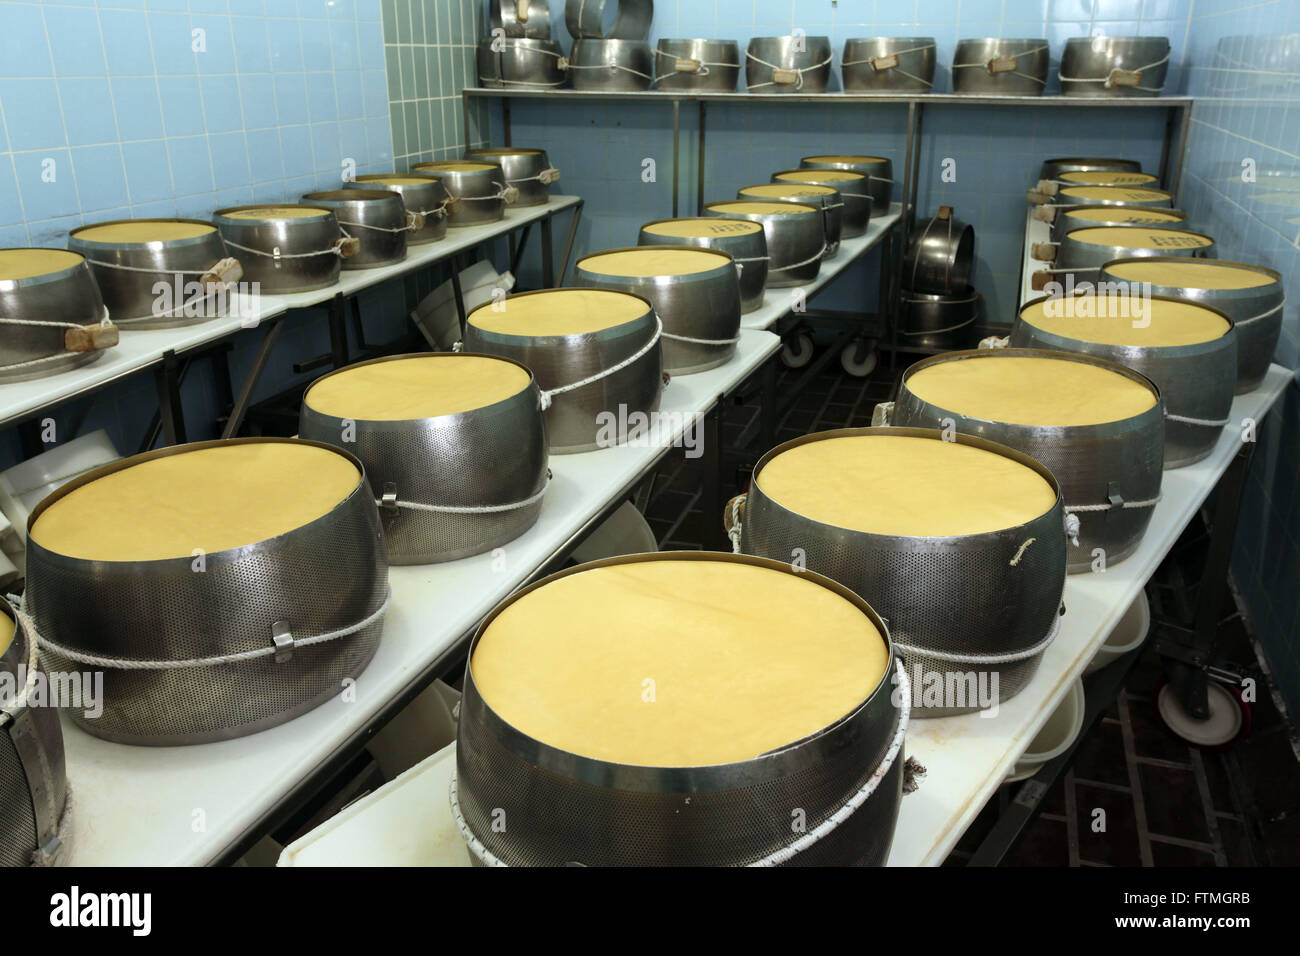 Manufactures type Grana cheese in dairy industry Stock Photo